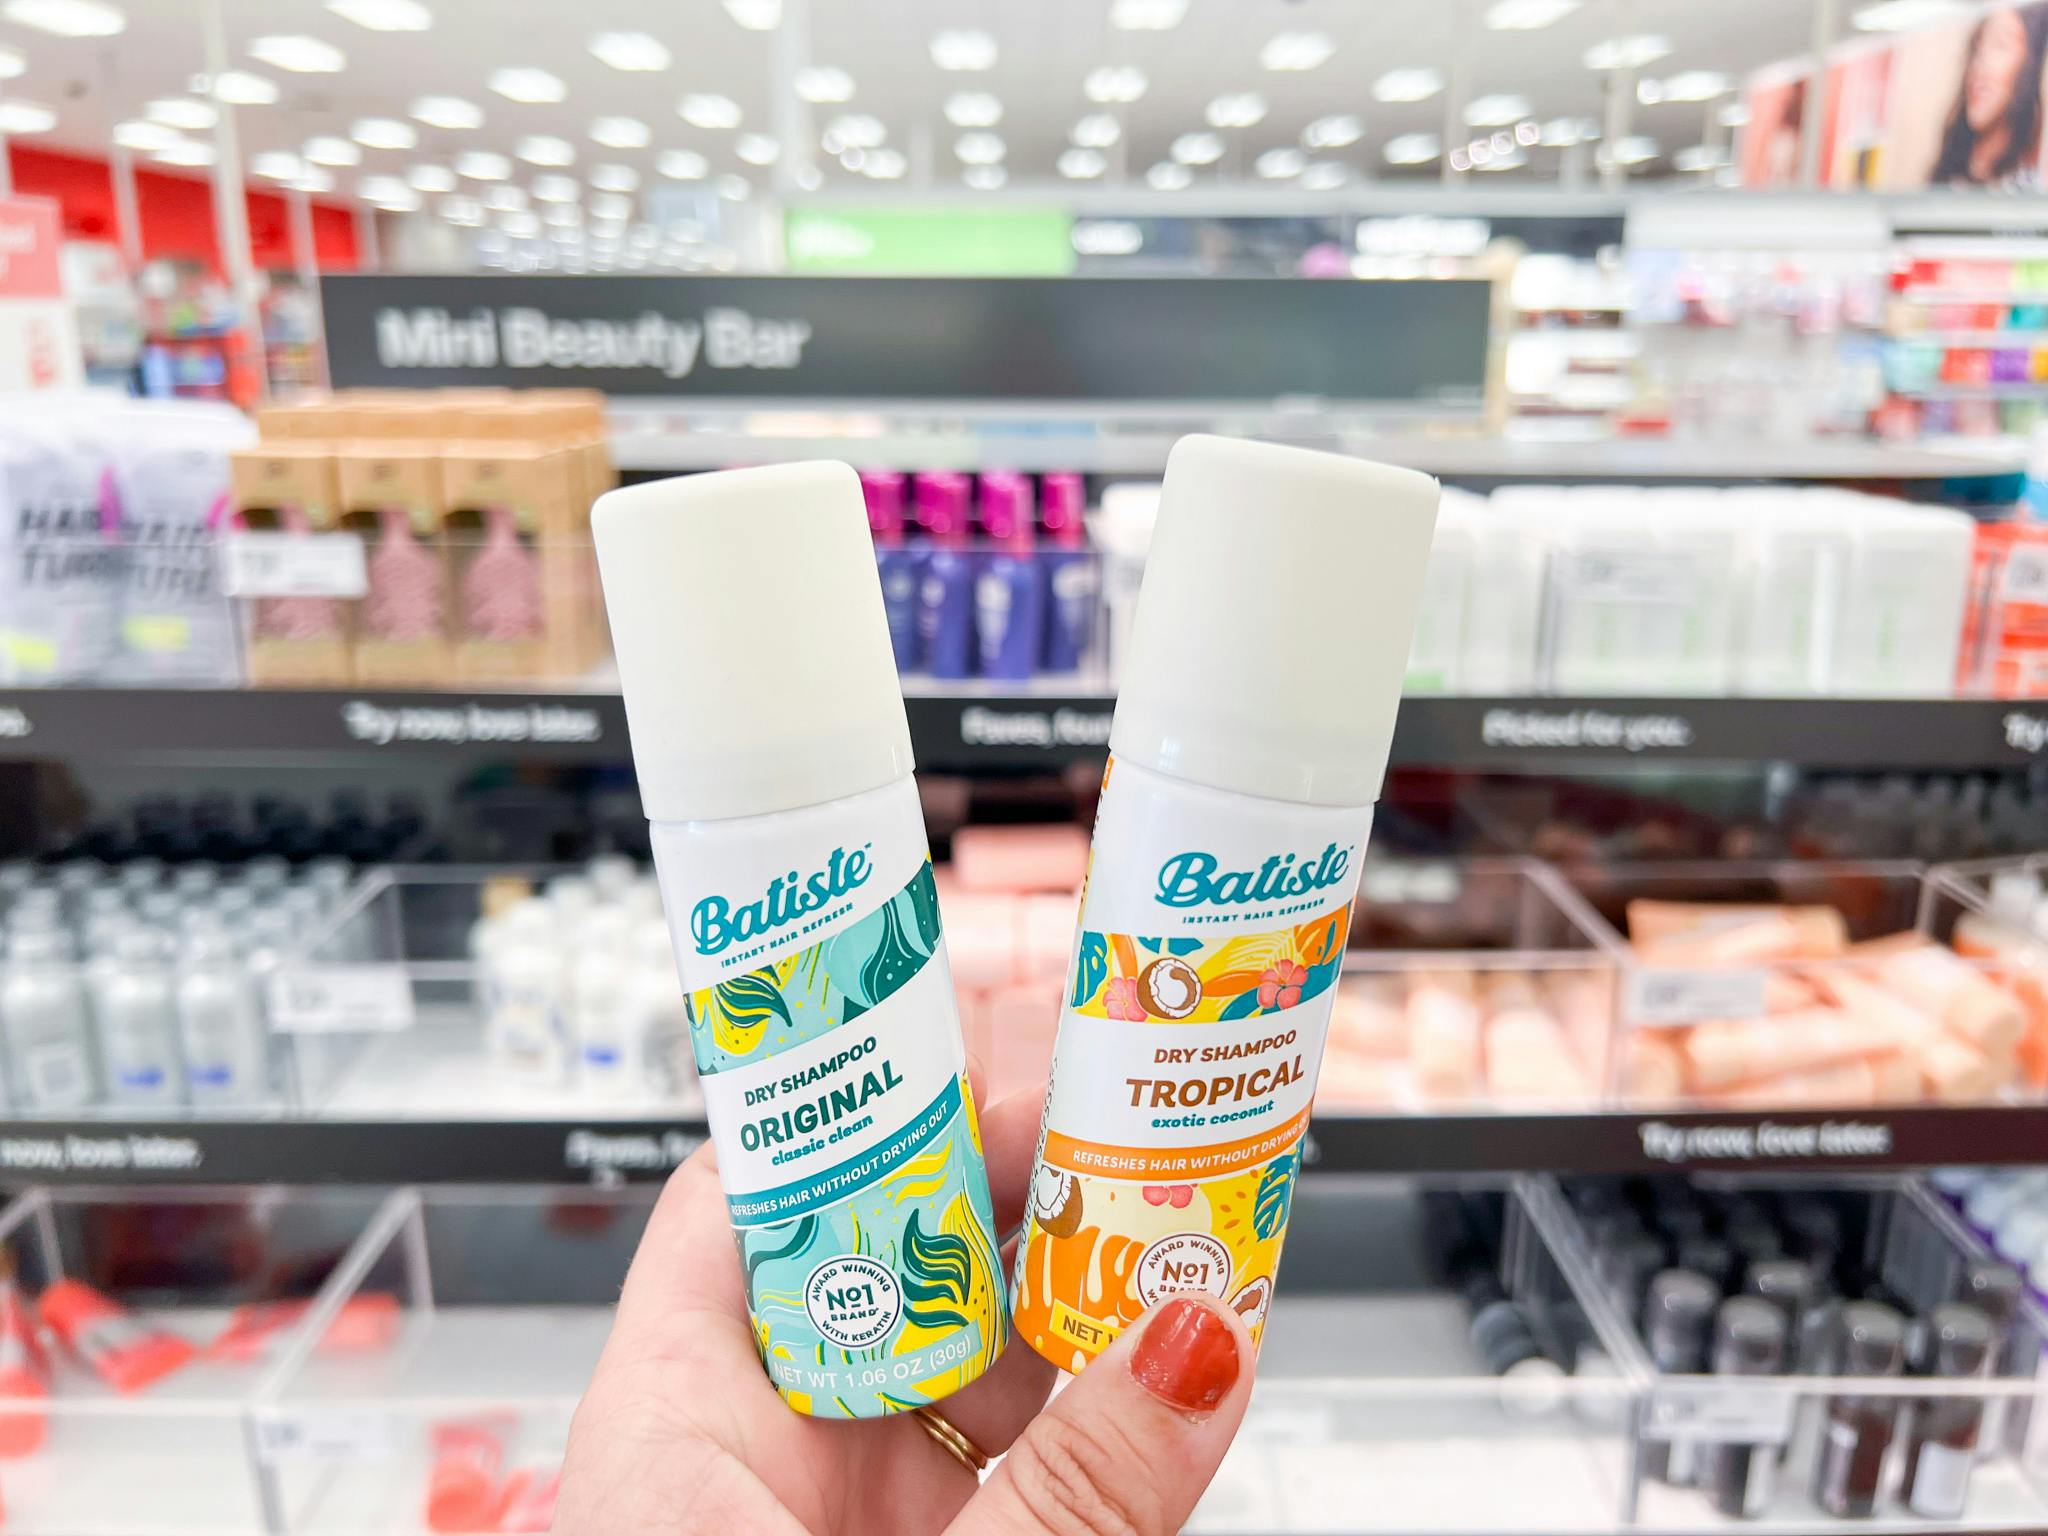 A hand holding two travel sized bottles of Batiste Dry Shampoo